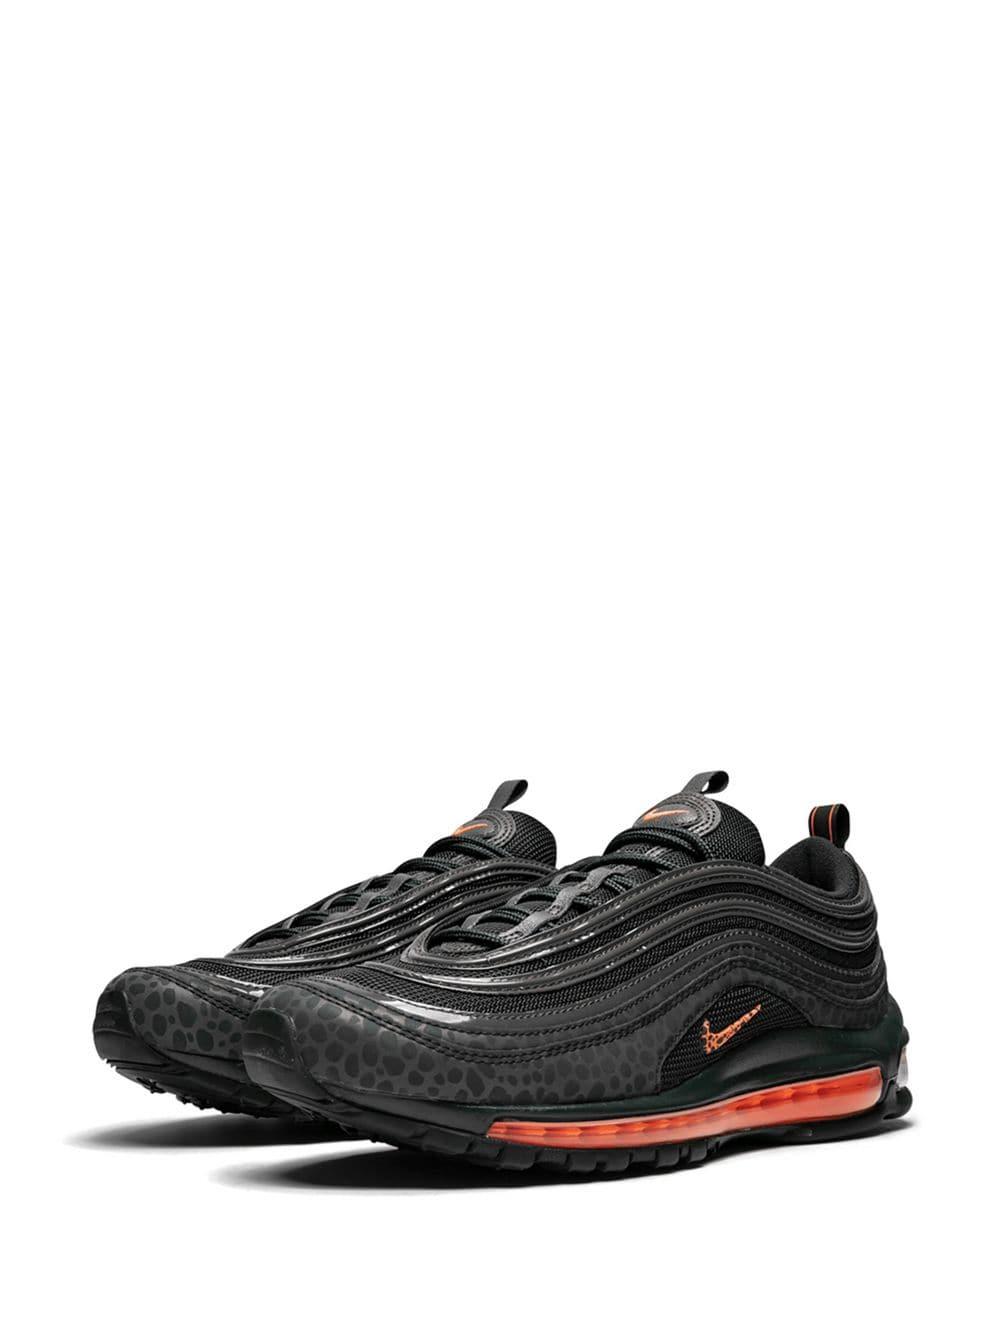 Nike Leather Air Max 97 Se Reflective Sneakers in Black for Men - Lyst